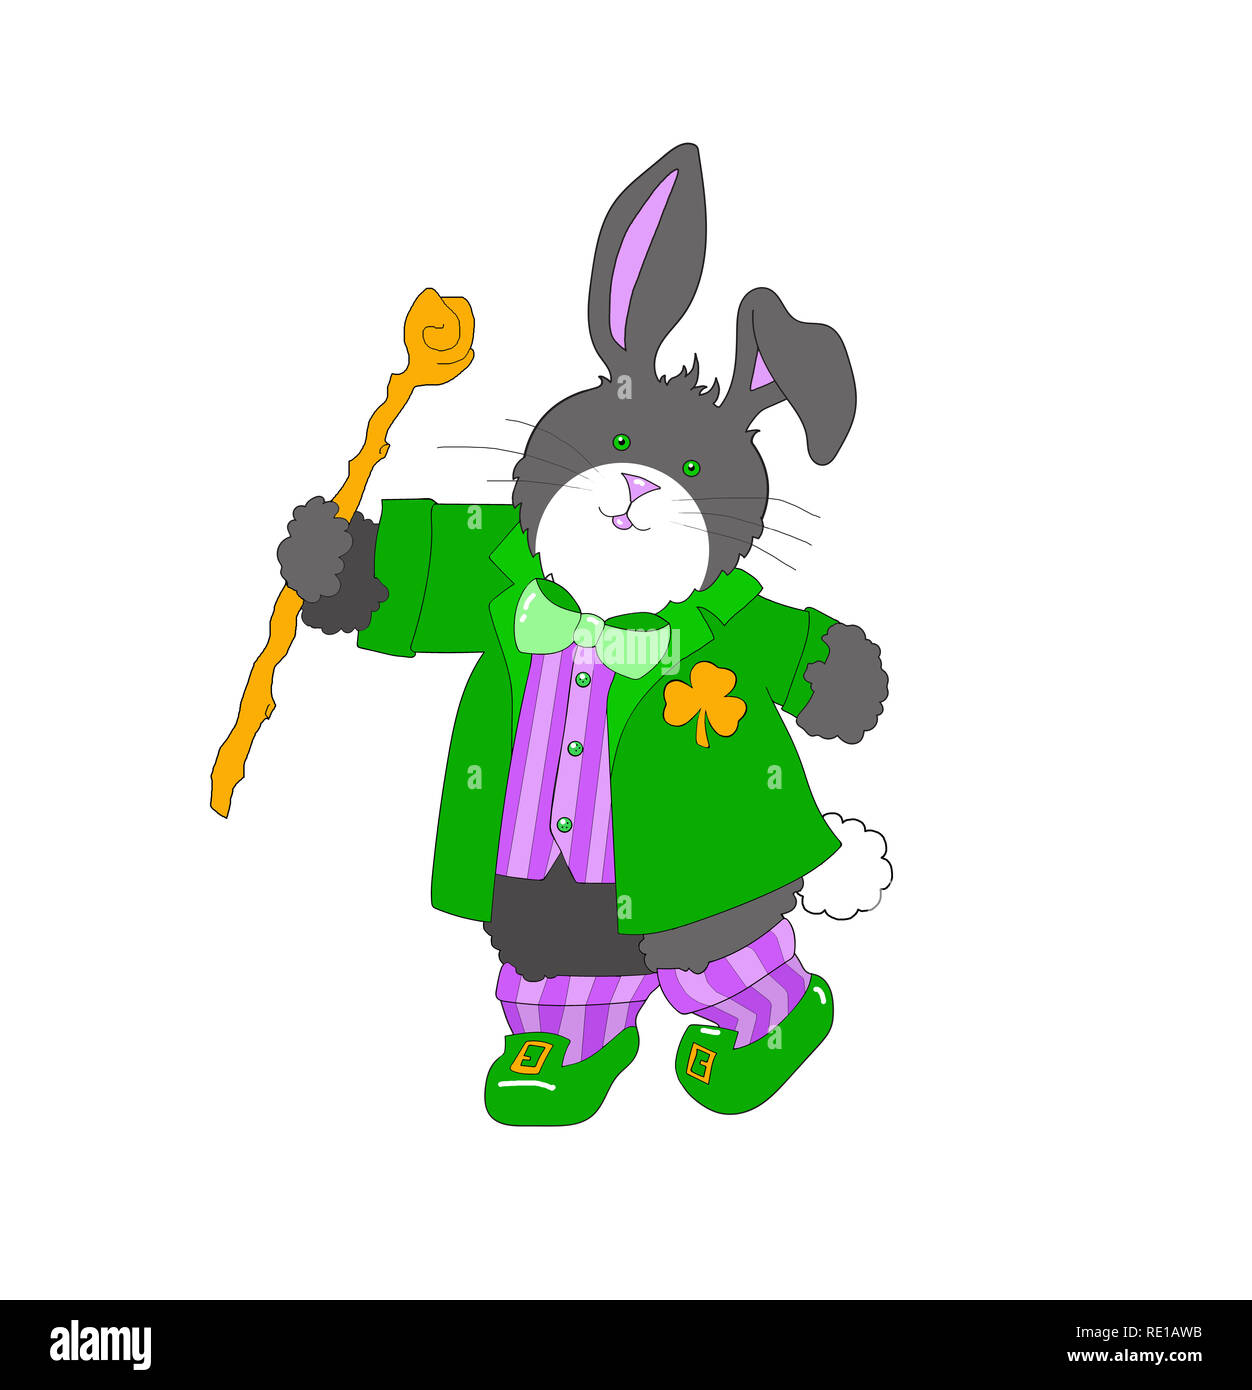 Clip art illustration of a cute rabbit/bunny dressed as a leprechaun and dancing on a white background. Stock Photo